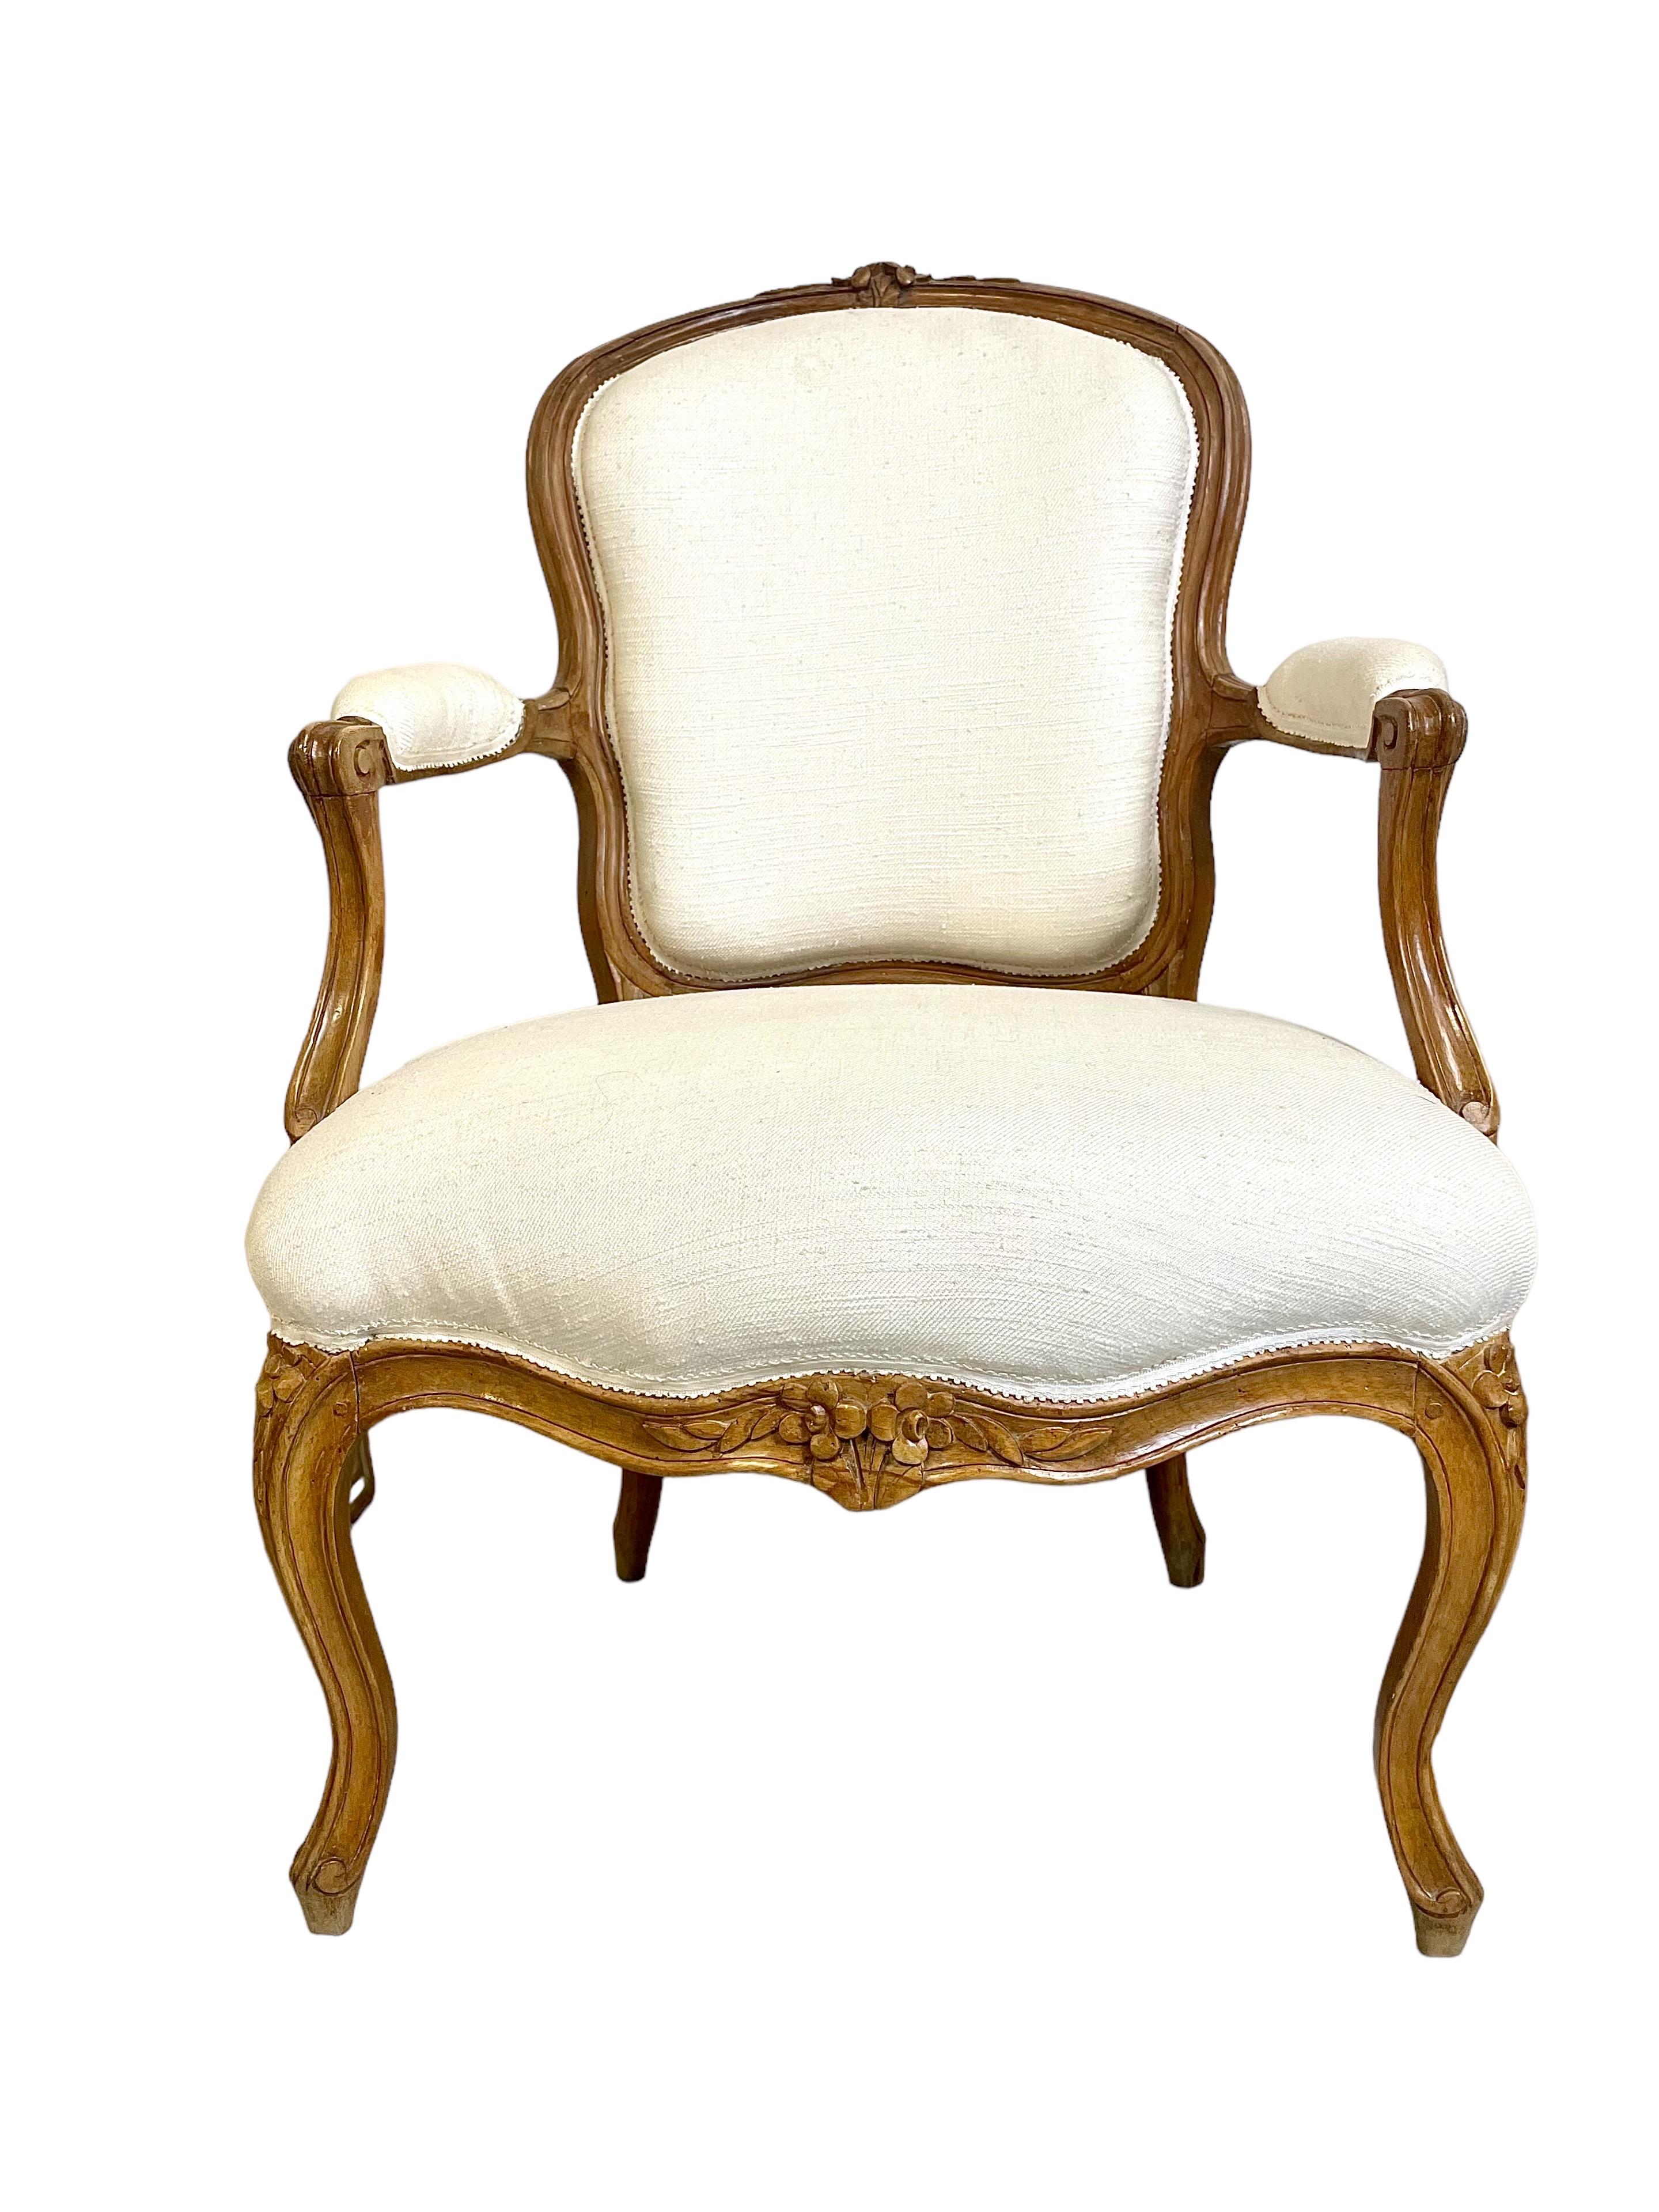 A very chic pair of Louis XV period 'fauteuils cabriolets' armchairs, in natural wood, their frames sculpted with great finesse and upholstered in cream fabric. Delightful hand carved floral motifs adorn the back crown, apron and the top of each